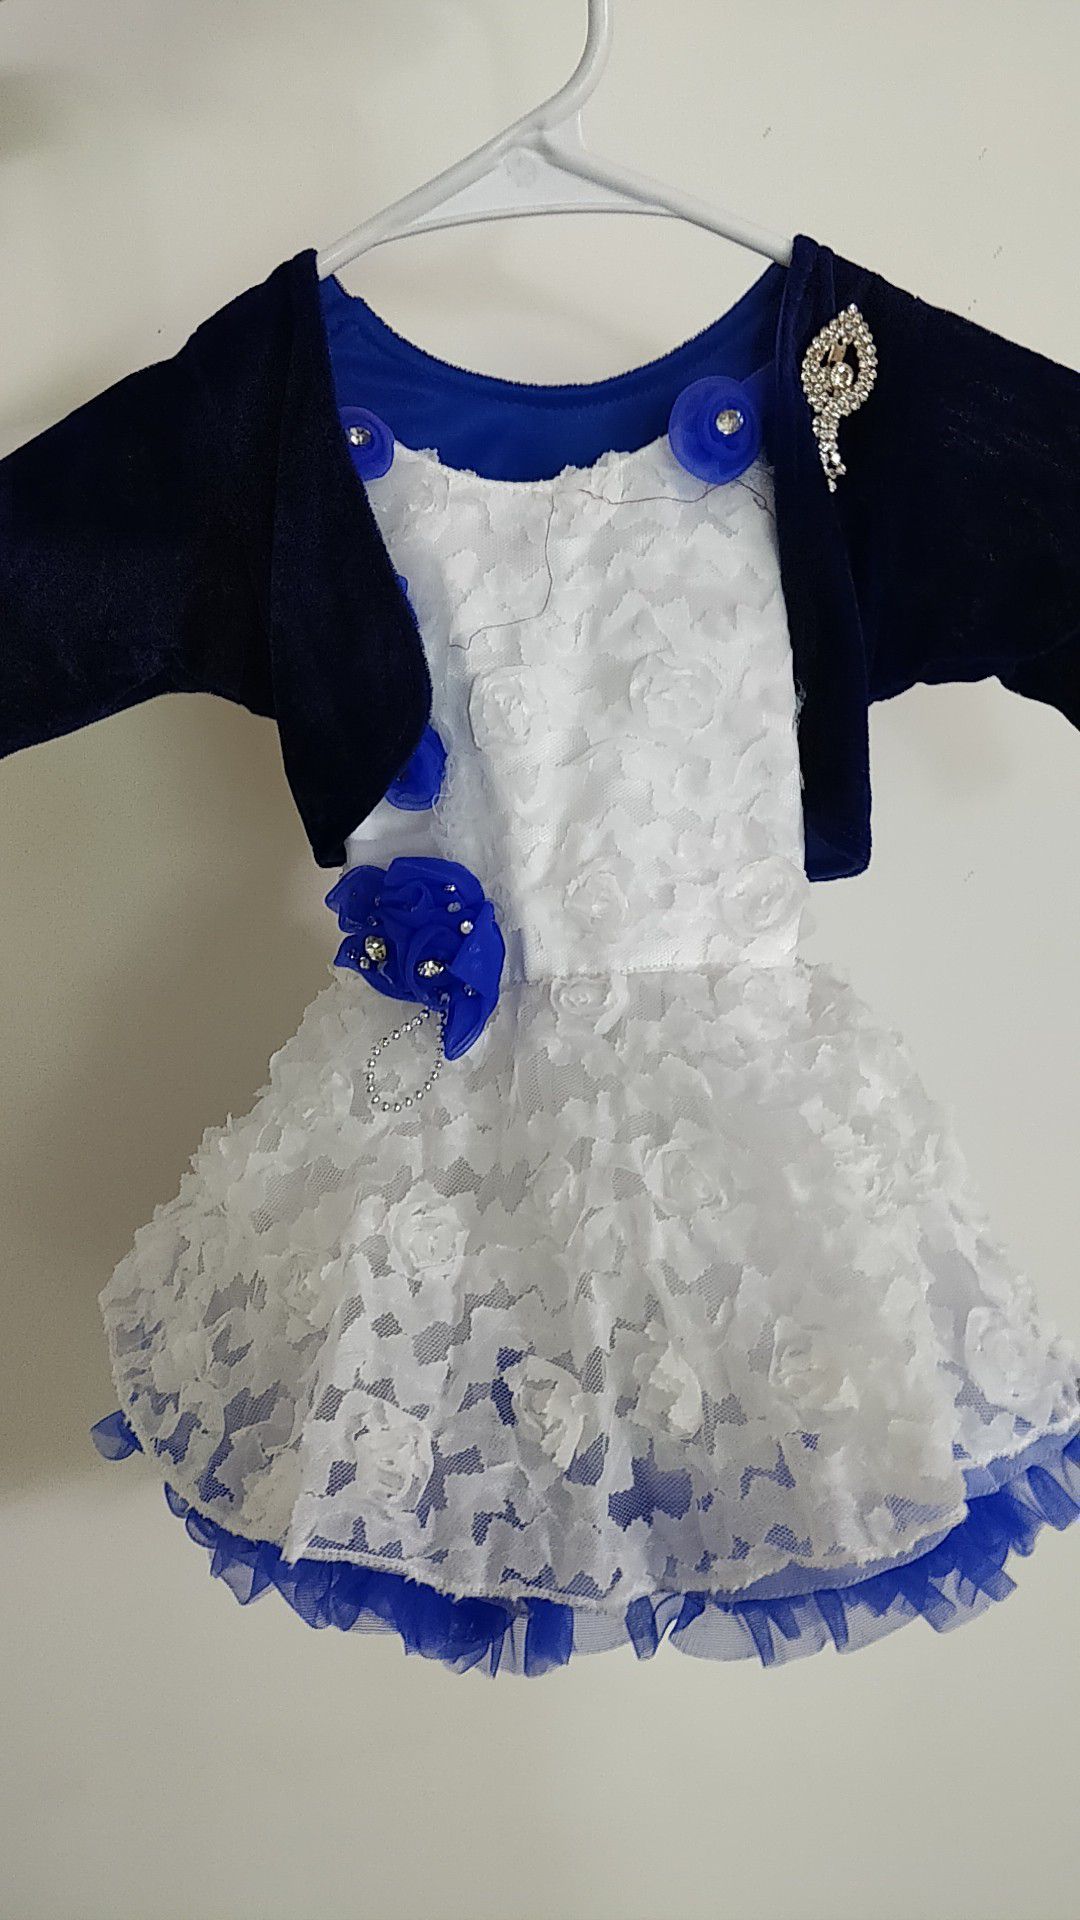 Baby party dress - 0 to 6 months